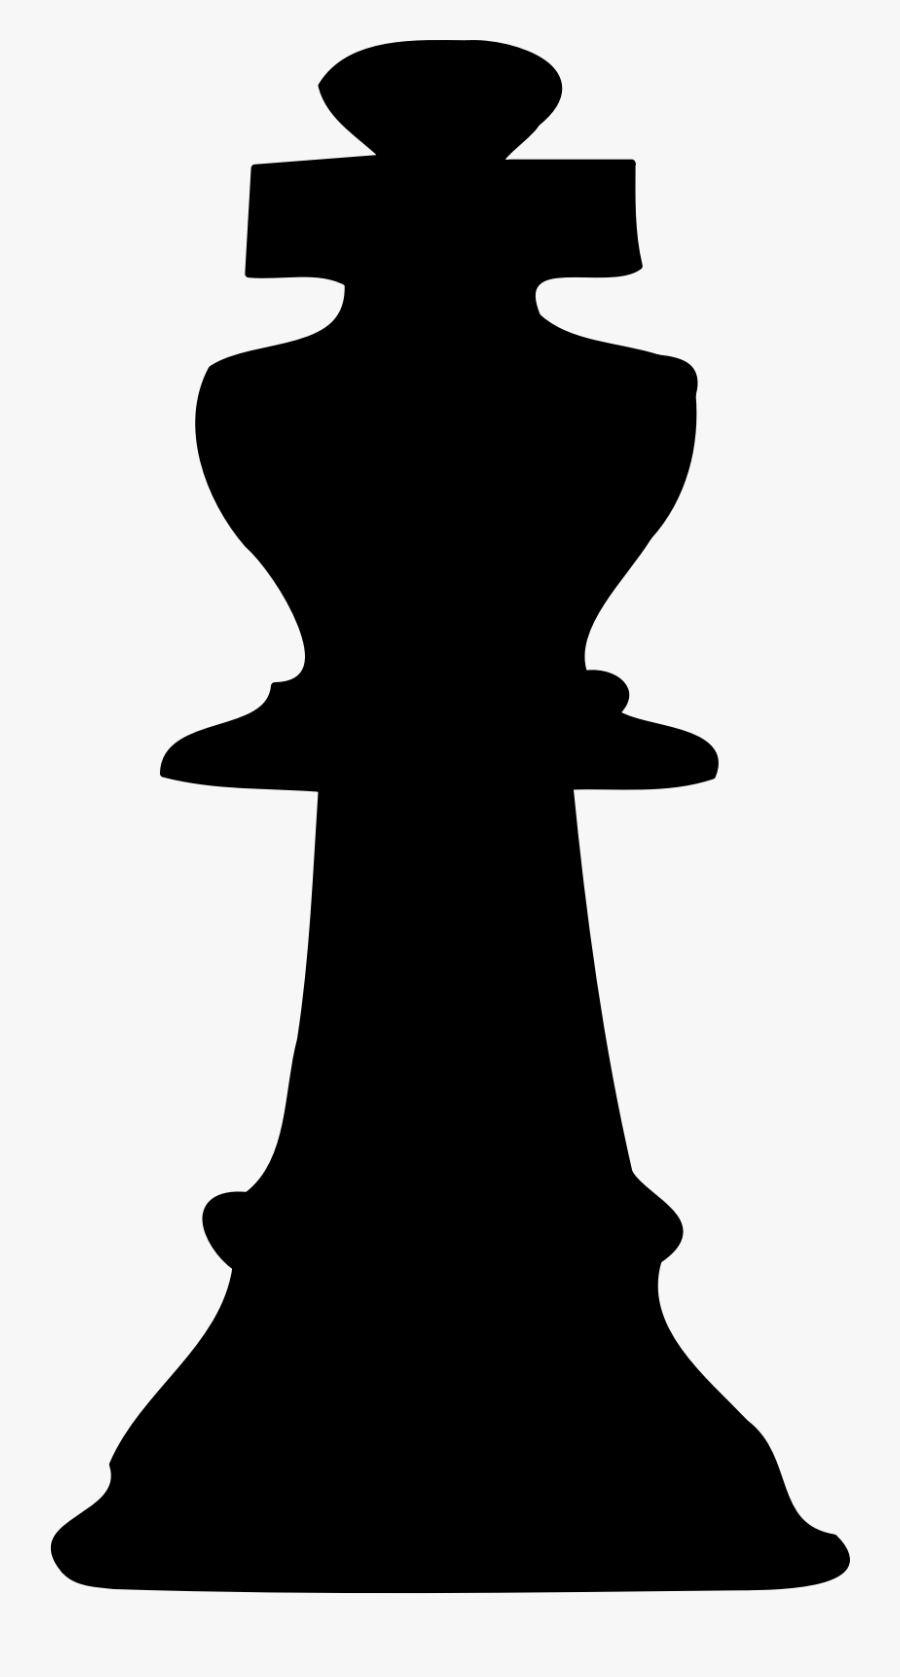 Transparent Throne Clipart Black And White - King Chess Piece Clip Art ...